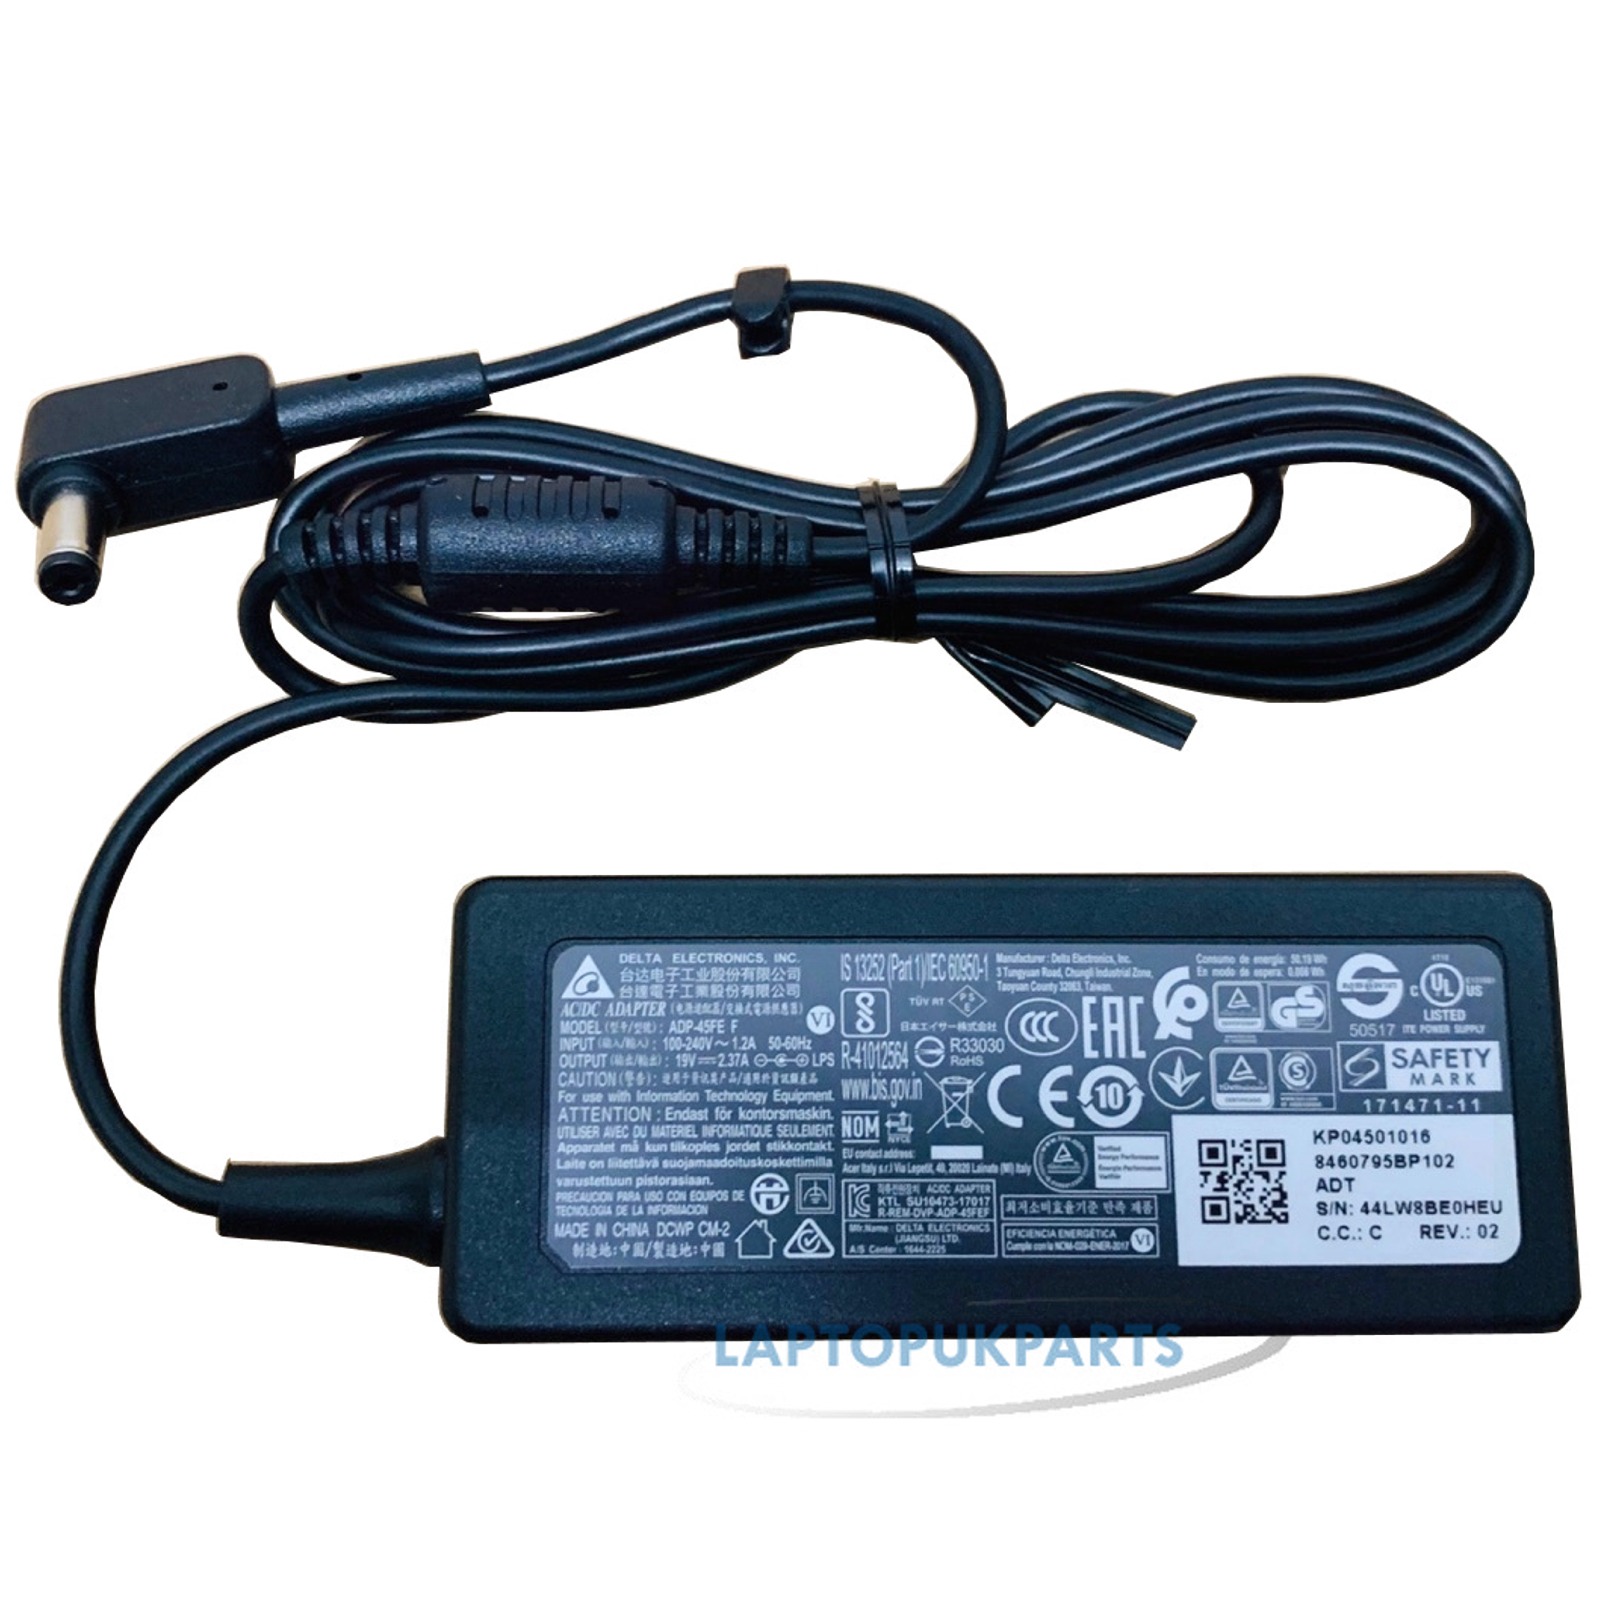 acer aspire one network adapter driver download